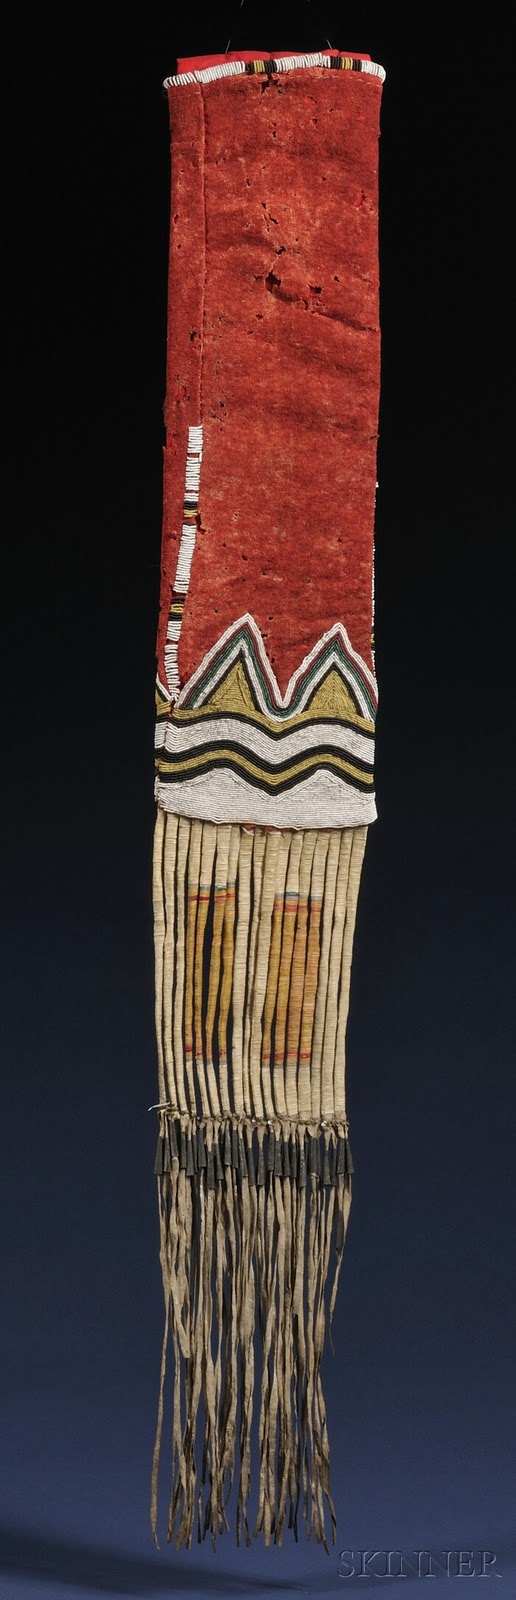 Yancton Beaded Cloth and Hide Pipebag, c. third quarter 19th century, the red trade cloth top beaded with curvilinear designs done in black, yellow, and white seed beads on one side, and black, yellow, white, translucent green, and red on the reverse, wit